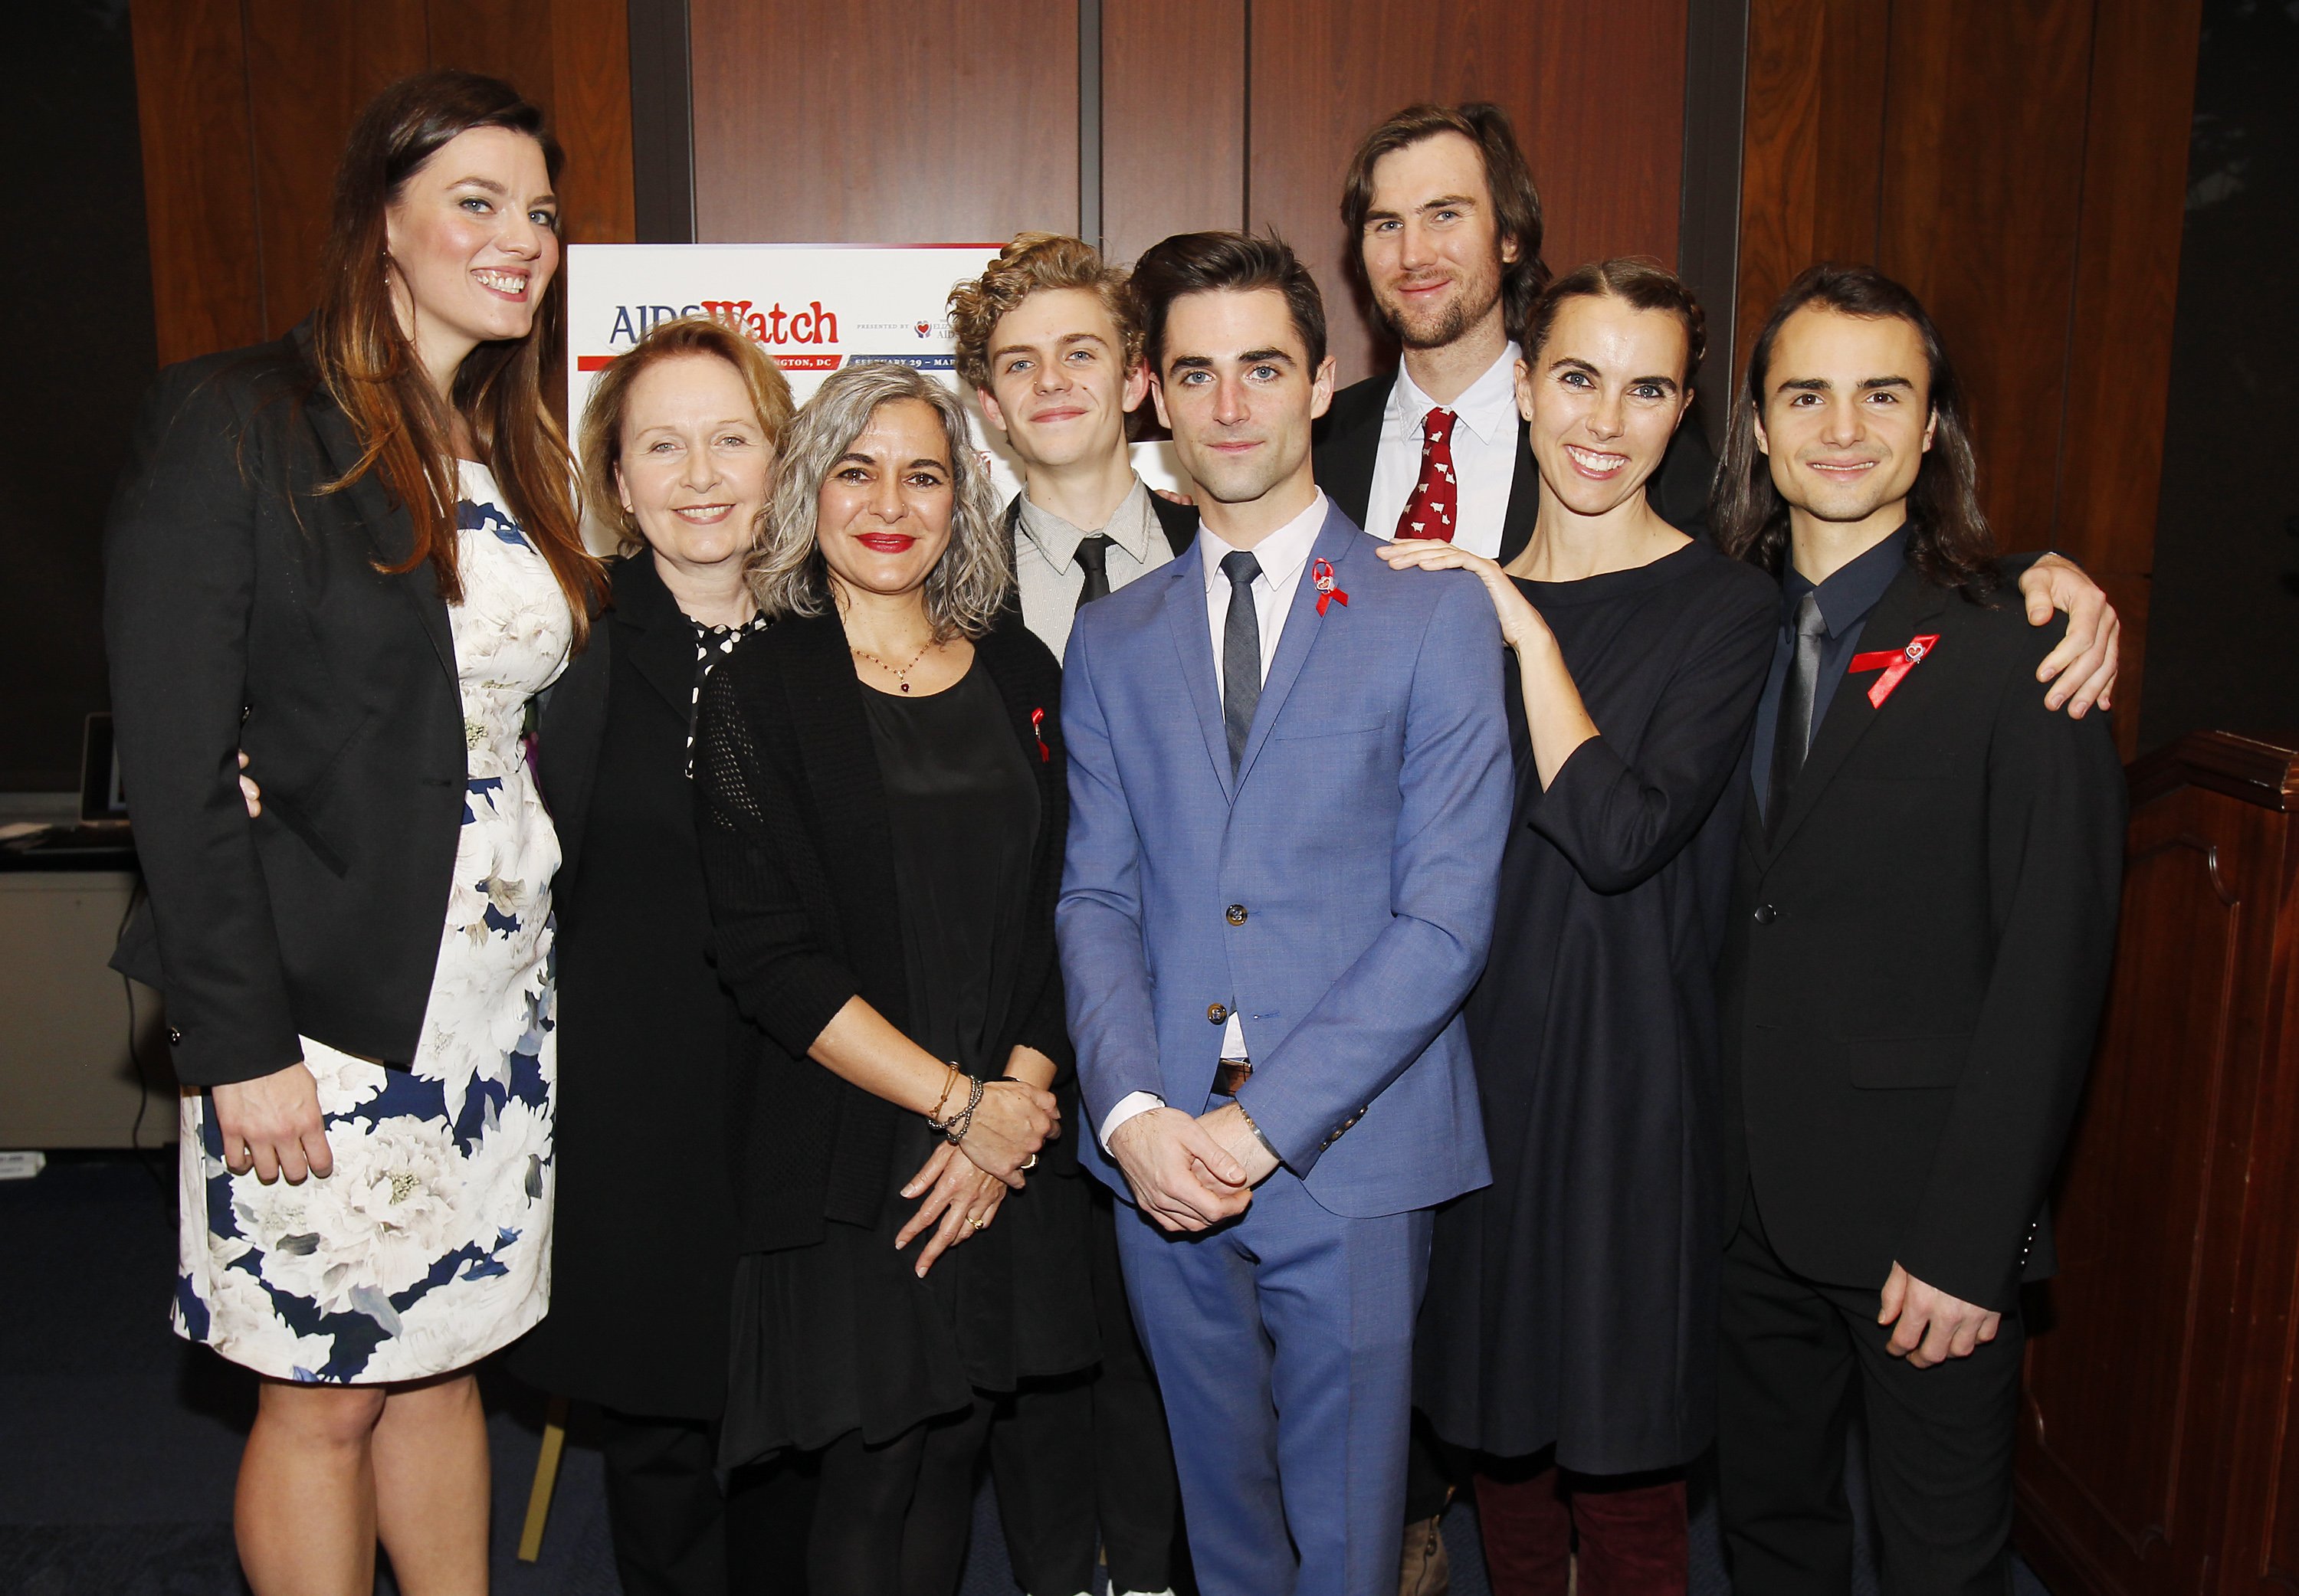 Eliza Carson, Kate Burton, Laela Wilding, Finn McMurray, Quinn Tivey, Tarquin Wilding, Naomi Wilding, and Rhys Tivey attend the AIDSWatch 2016 Positive Leadership Award Reception at the Rayburn House Office Building on February 29, 2016 | Photo: GettyImages